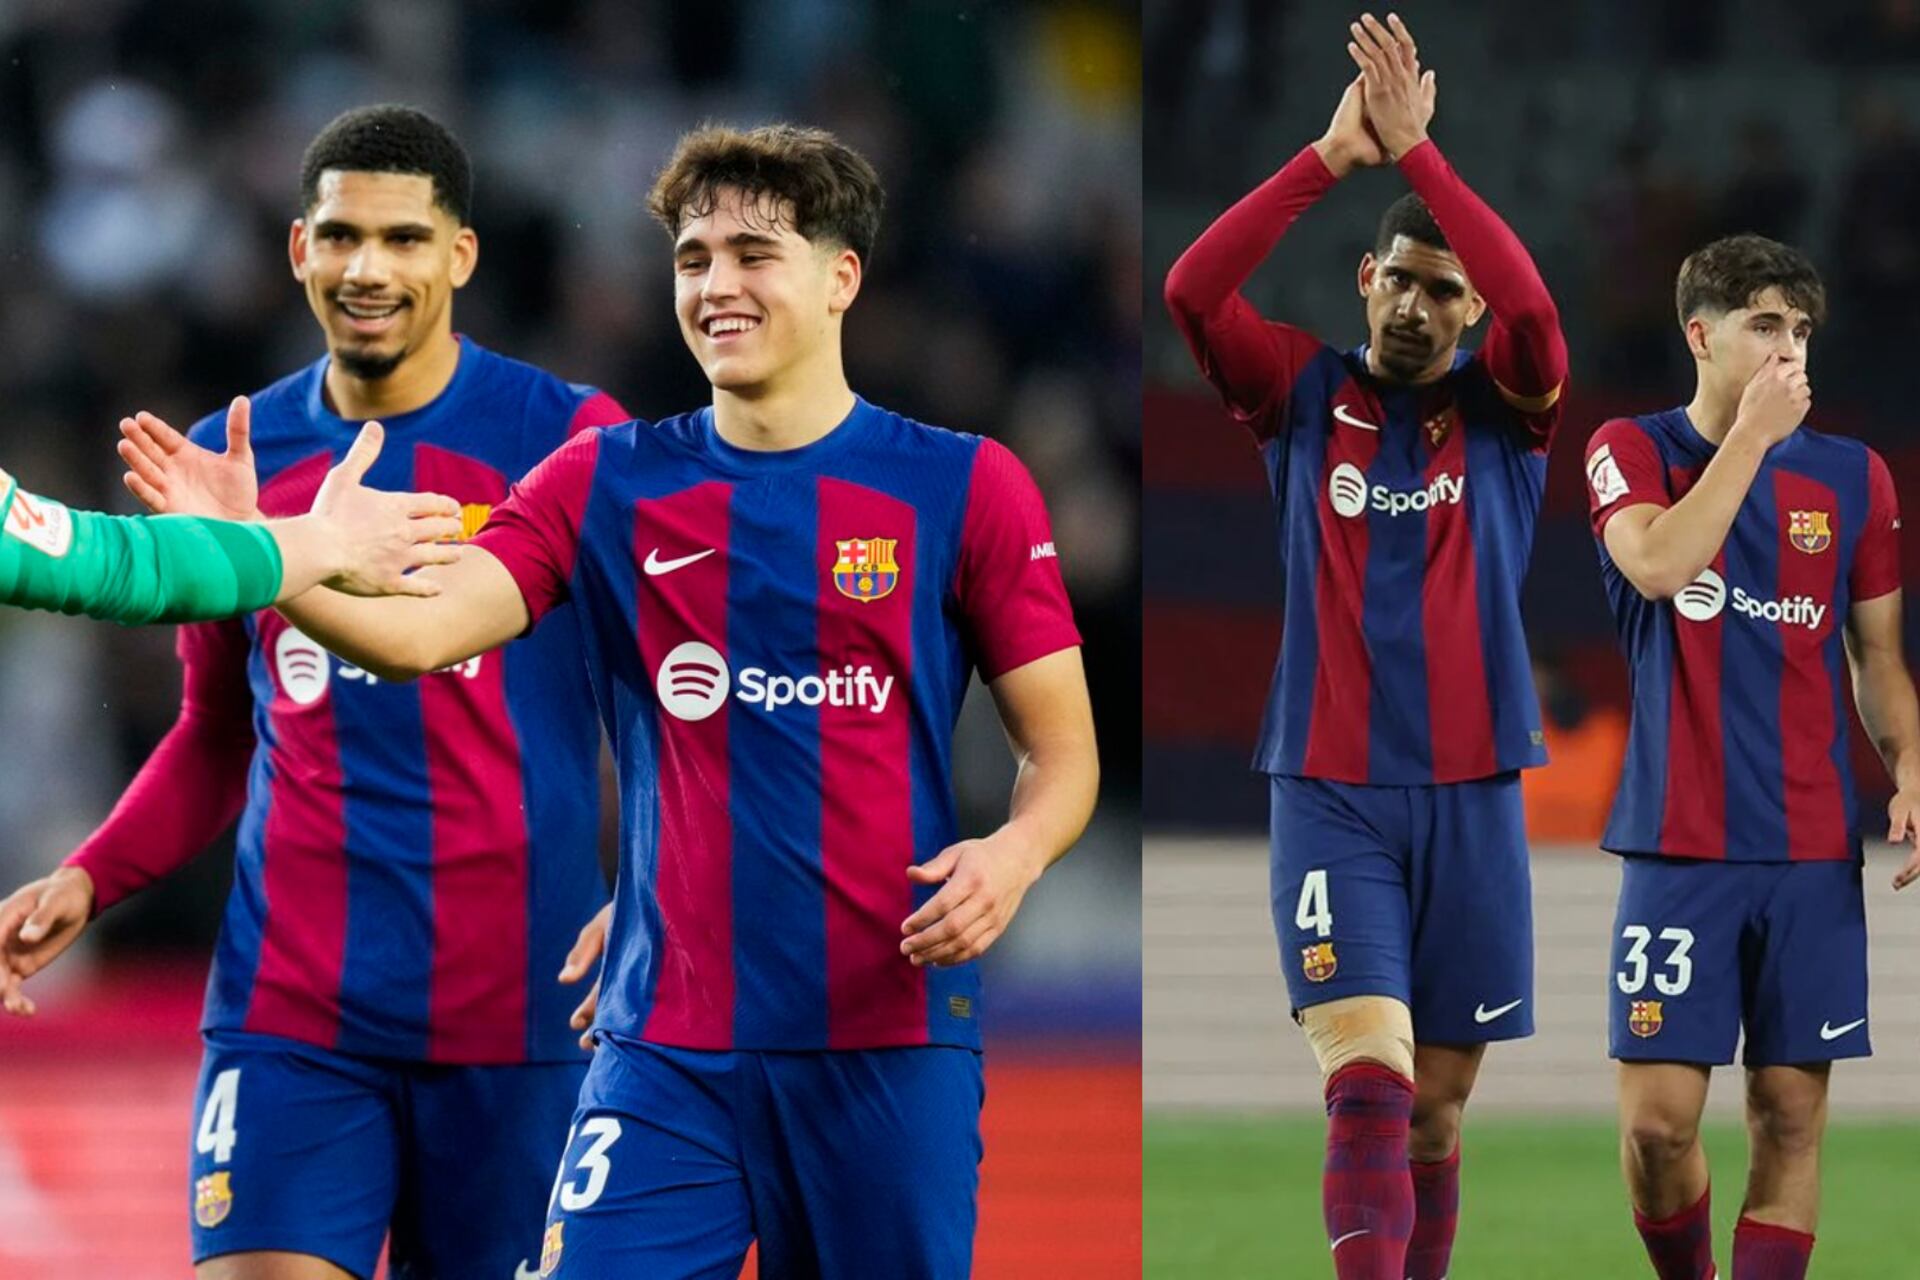 Not Araujo or Cubarsi, the two defenders FC Barcelona are willing to sell